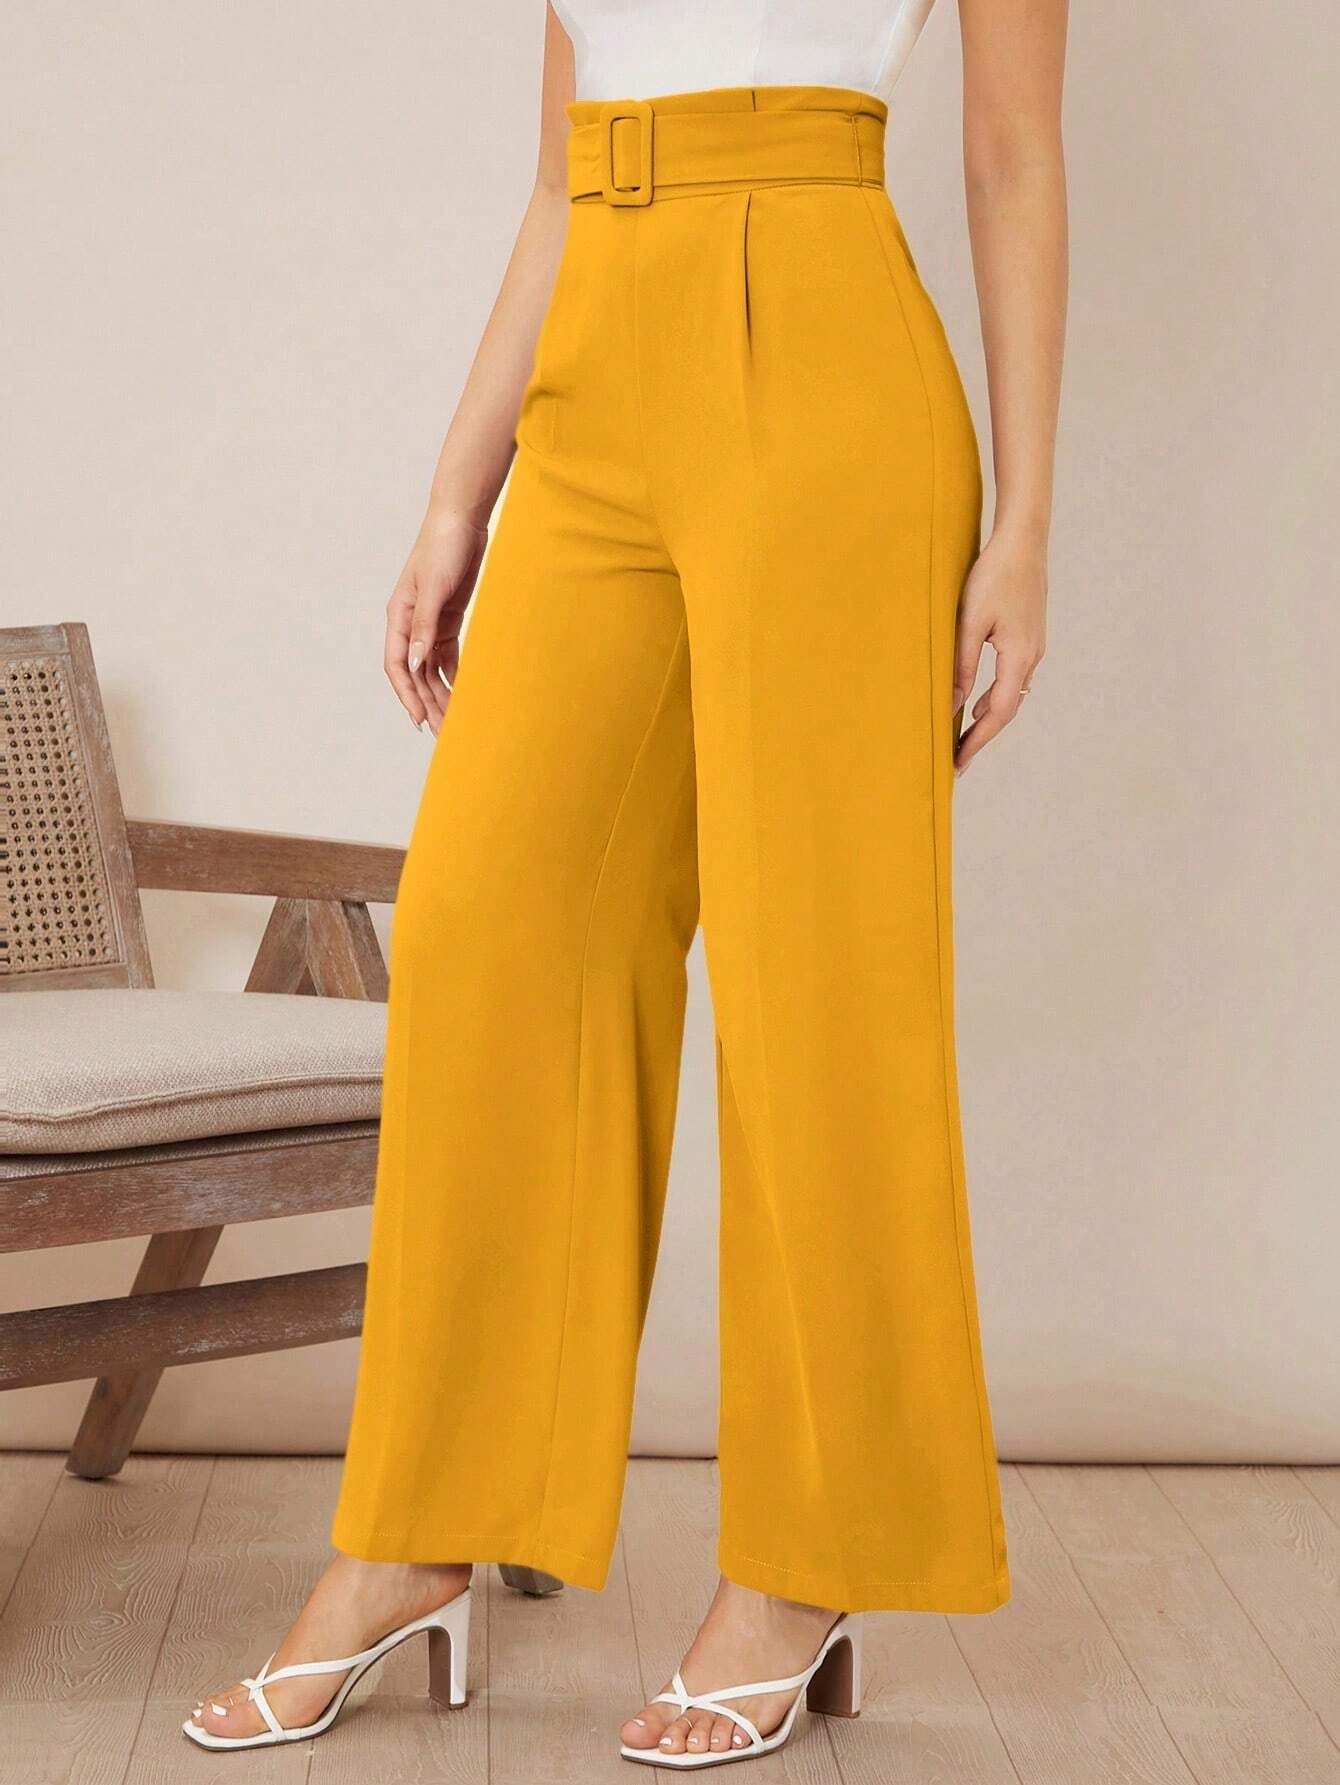 SHEIN Privé Solid Belted Wide Leg Pants | SHEIN